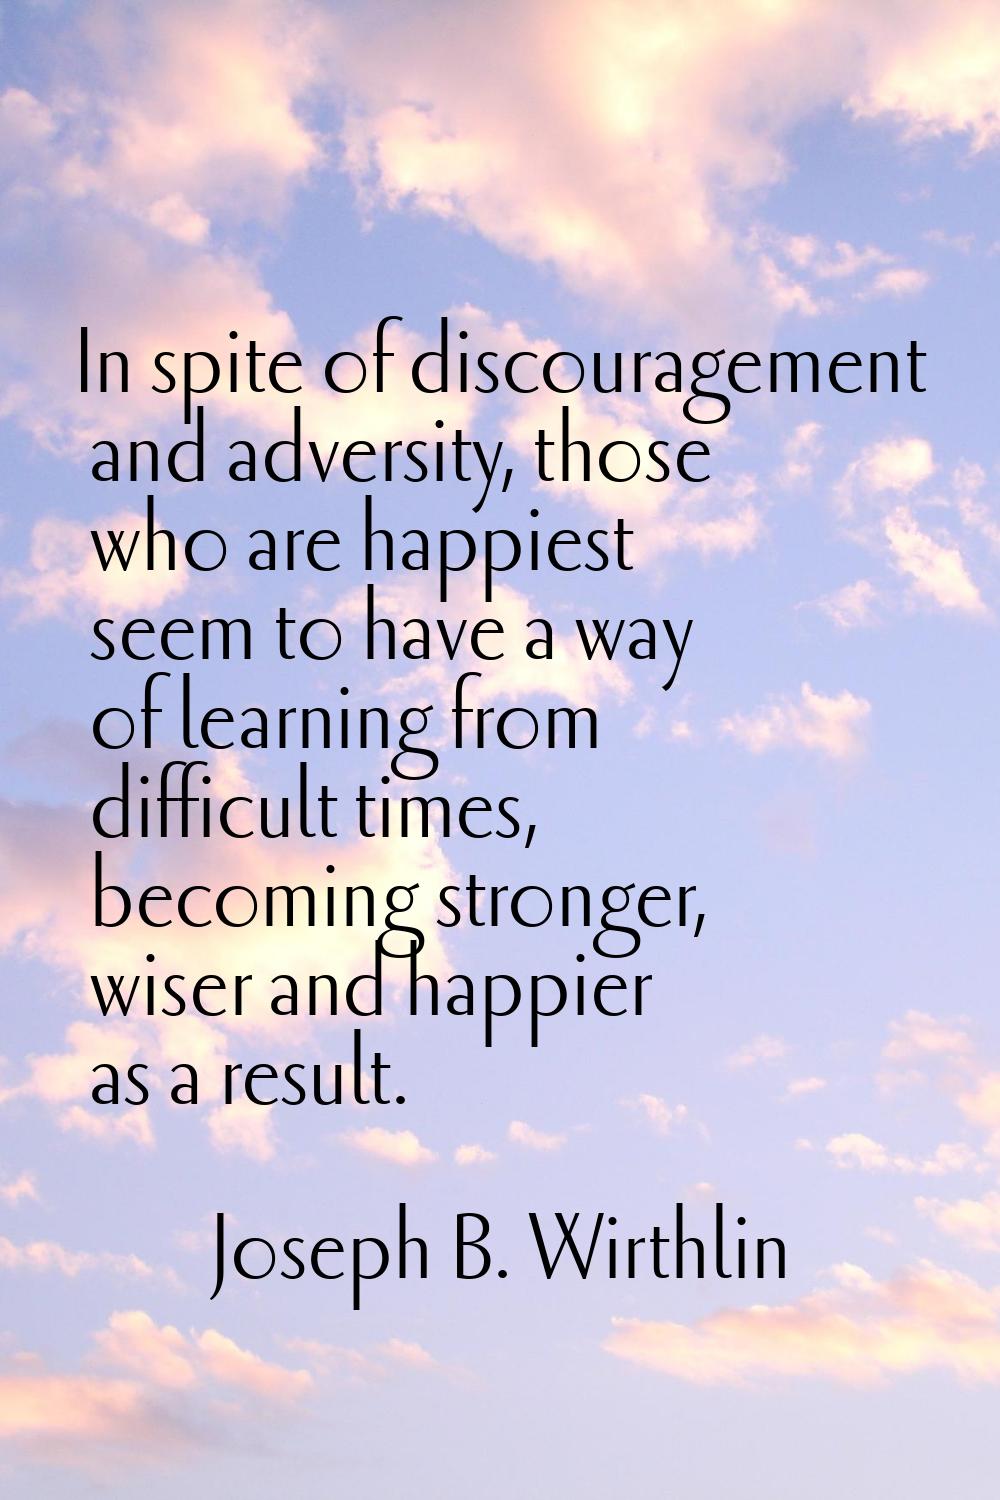 In spite of discouragement and adversity, those who are happiest seem to have a way of learning fro